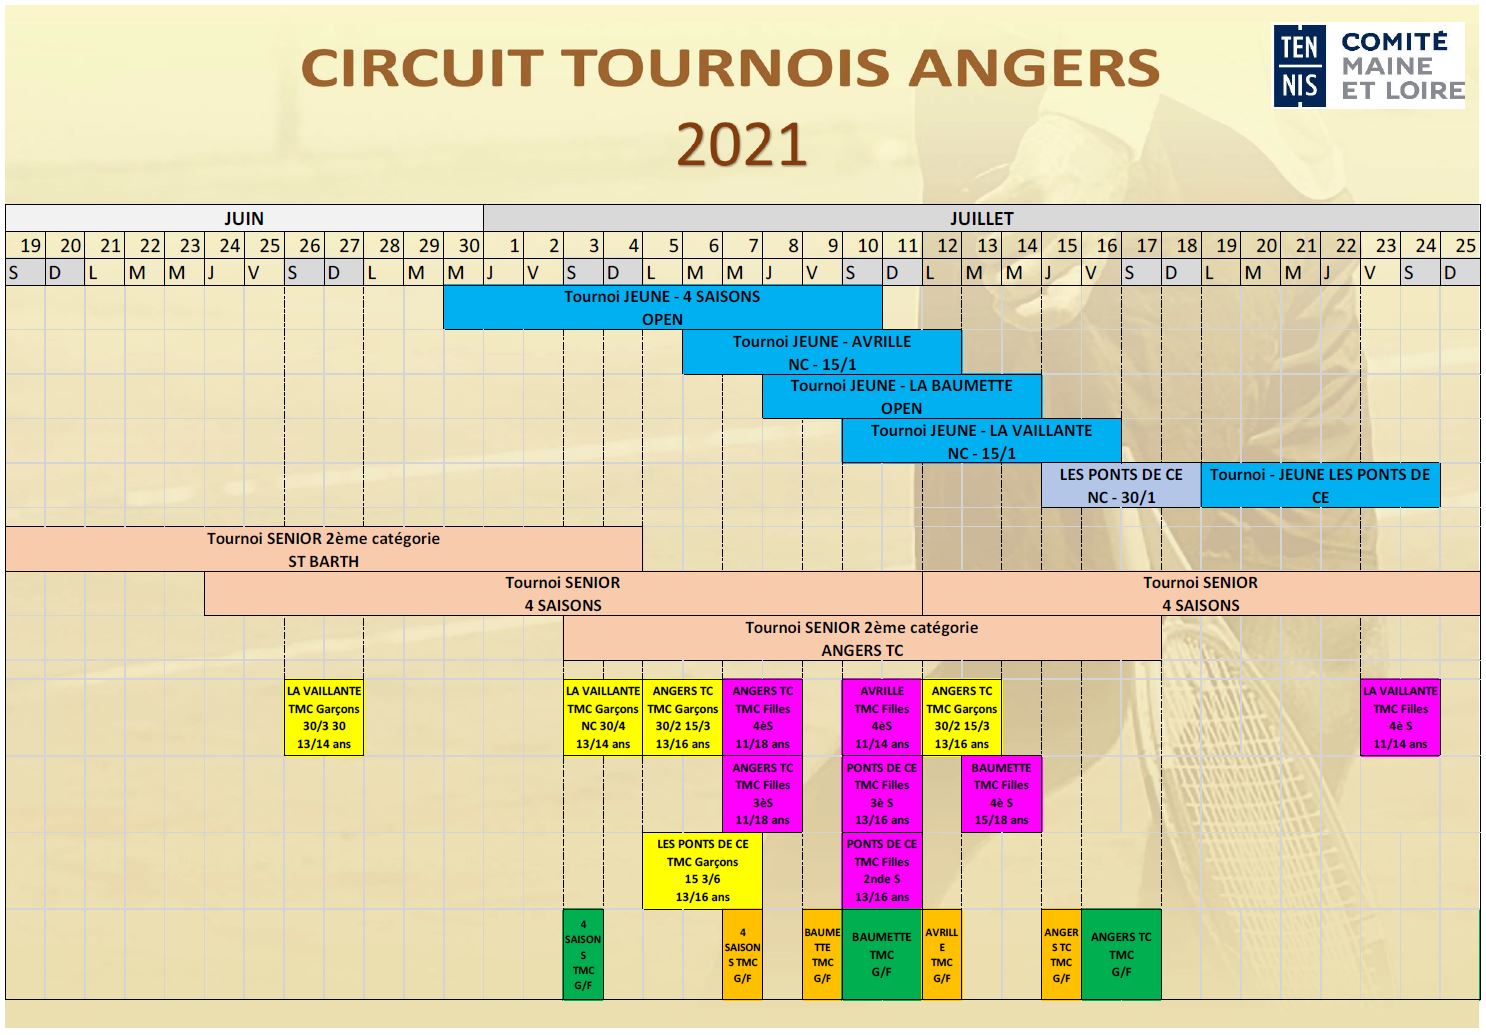 AFFICHE CIRCUIT TOURNOIS ANGERS 2021 page 1